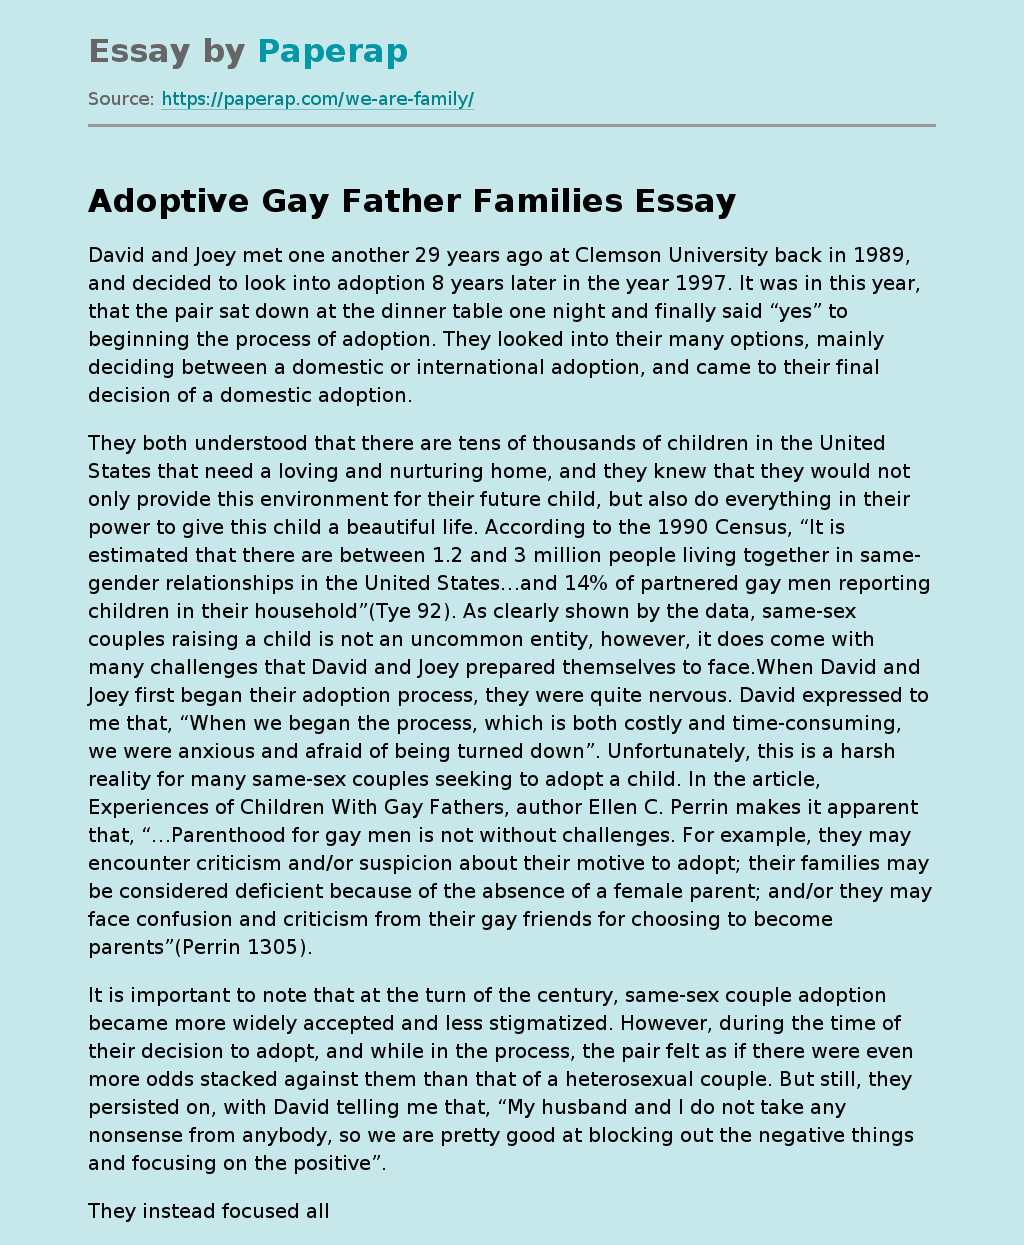 Adoptive Gay Father Families